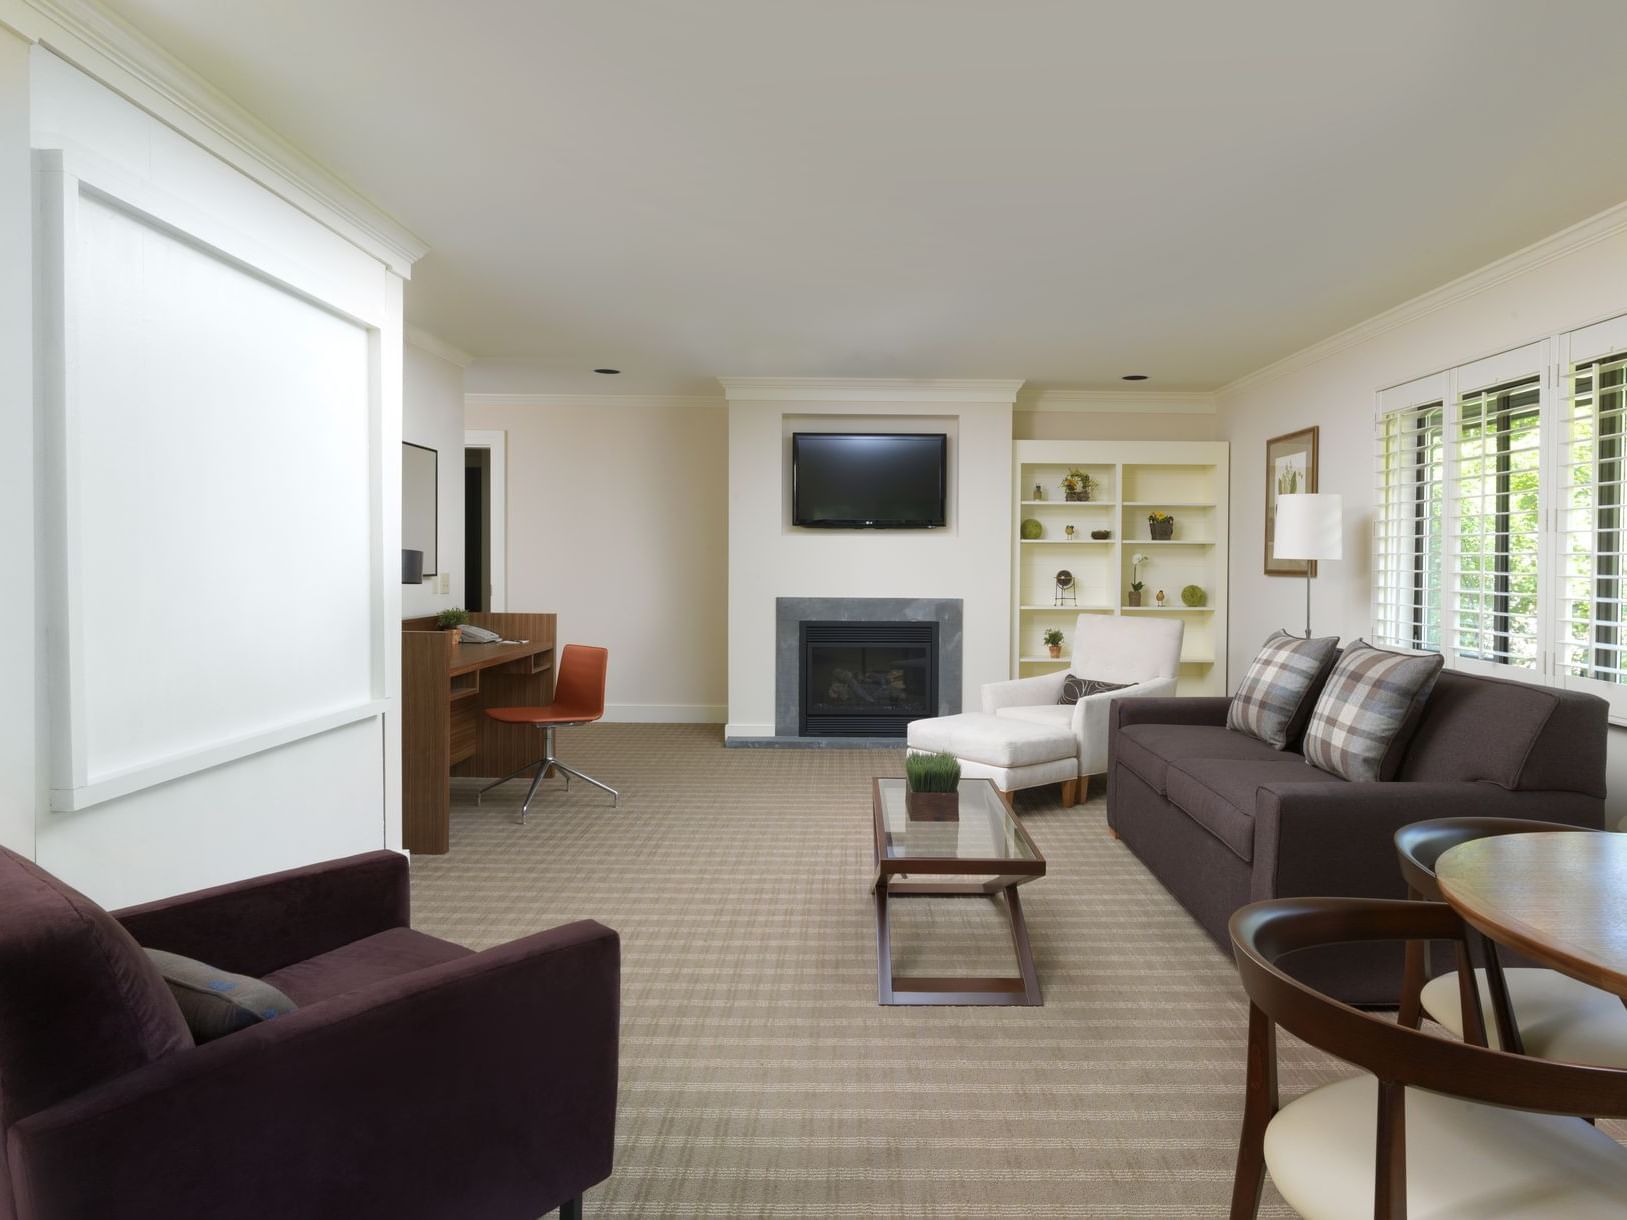 Living area in the Cotton Brook Suite at Topnotch Stowe Resort